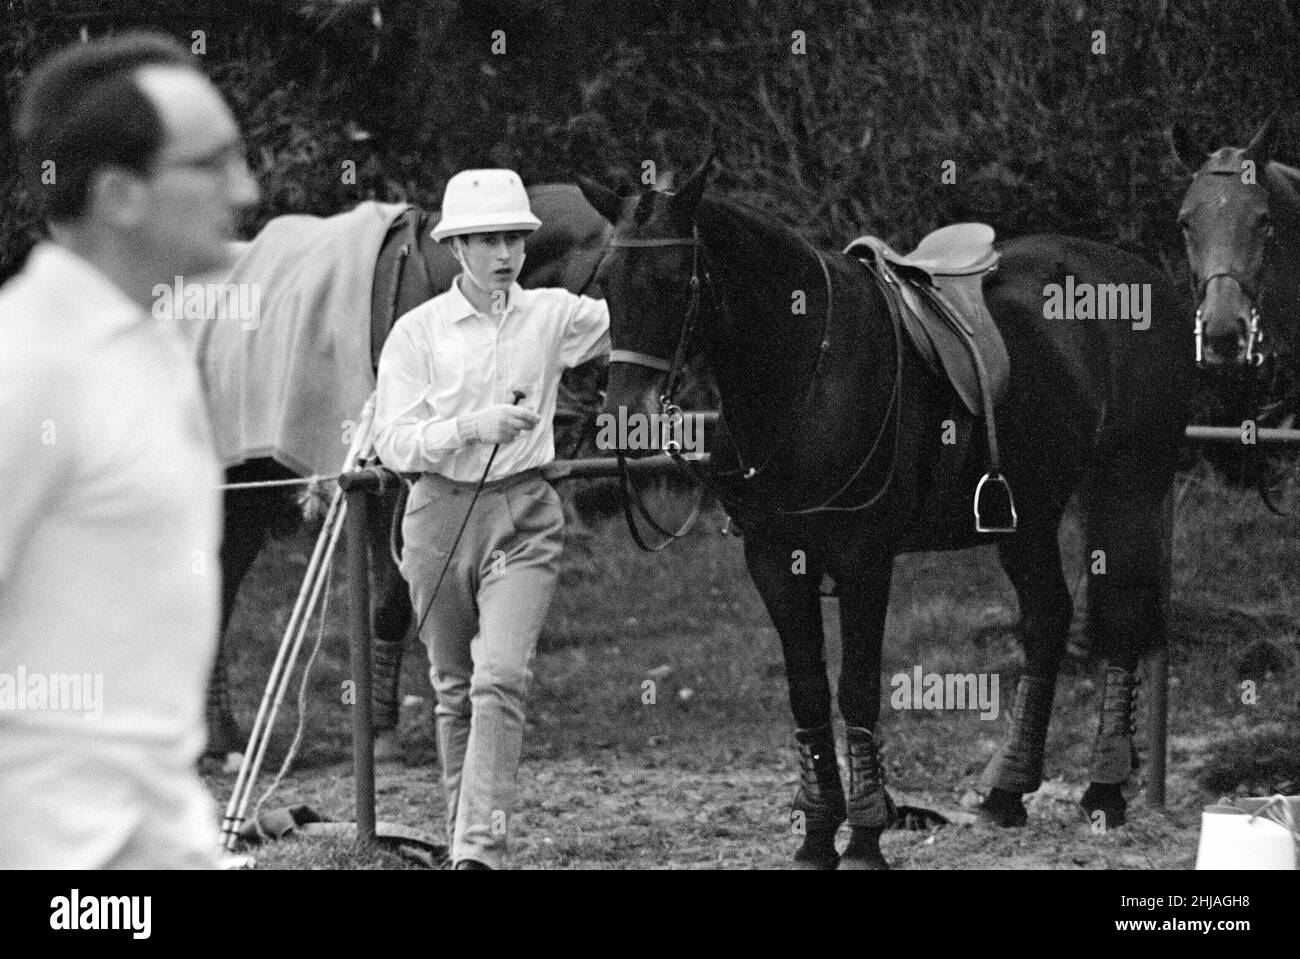 Young Prince Charles at Smith's Lawn in Windsor Park, played together with his father Prince Philip,  Duke of Edinburgh, for the first time in a practice match before the start of the polo season.  There were cries of praise when 15 year old Charles scored his very first goal.  Picture shows: Prince Charles with his pony before the start of the match. 13th April 1964. Stock Photo